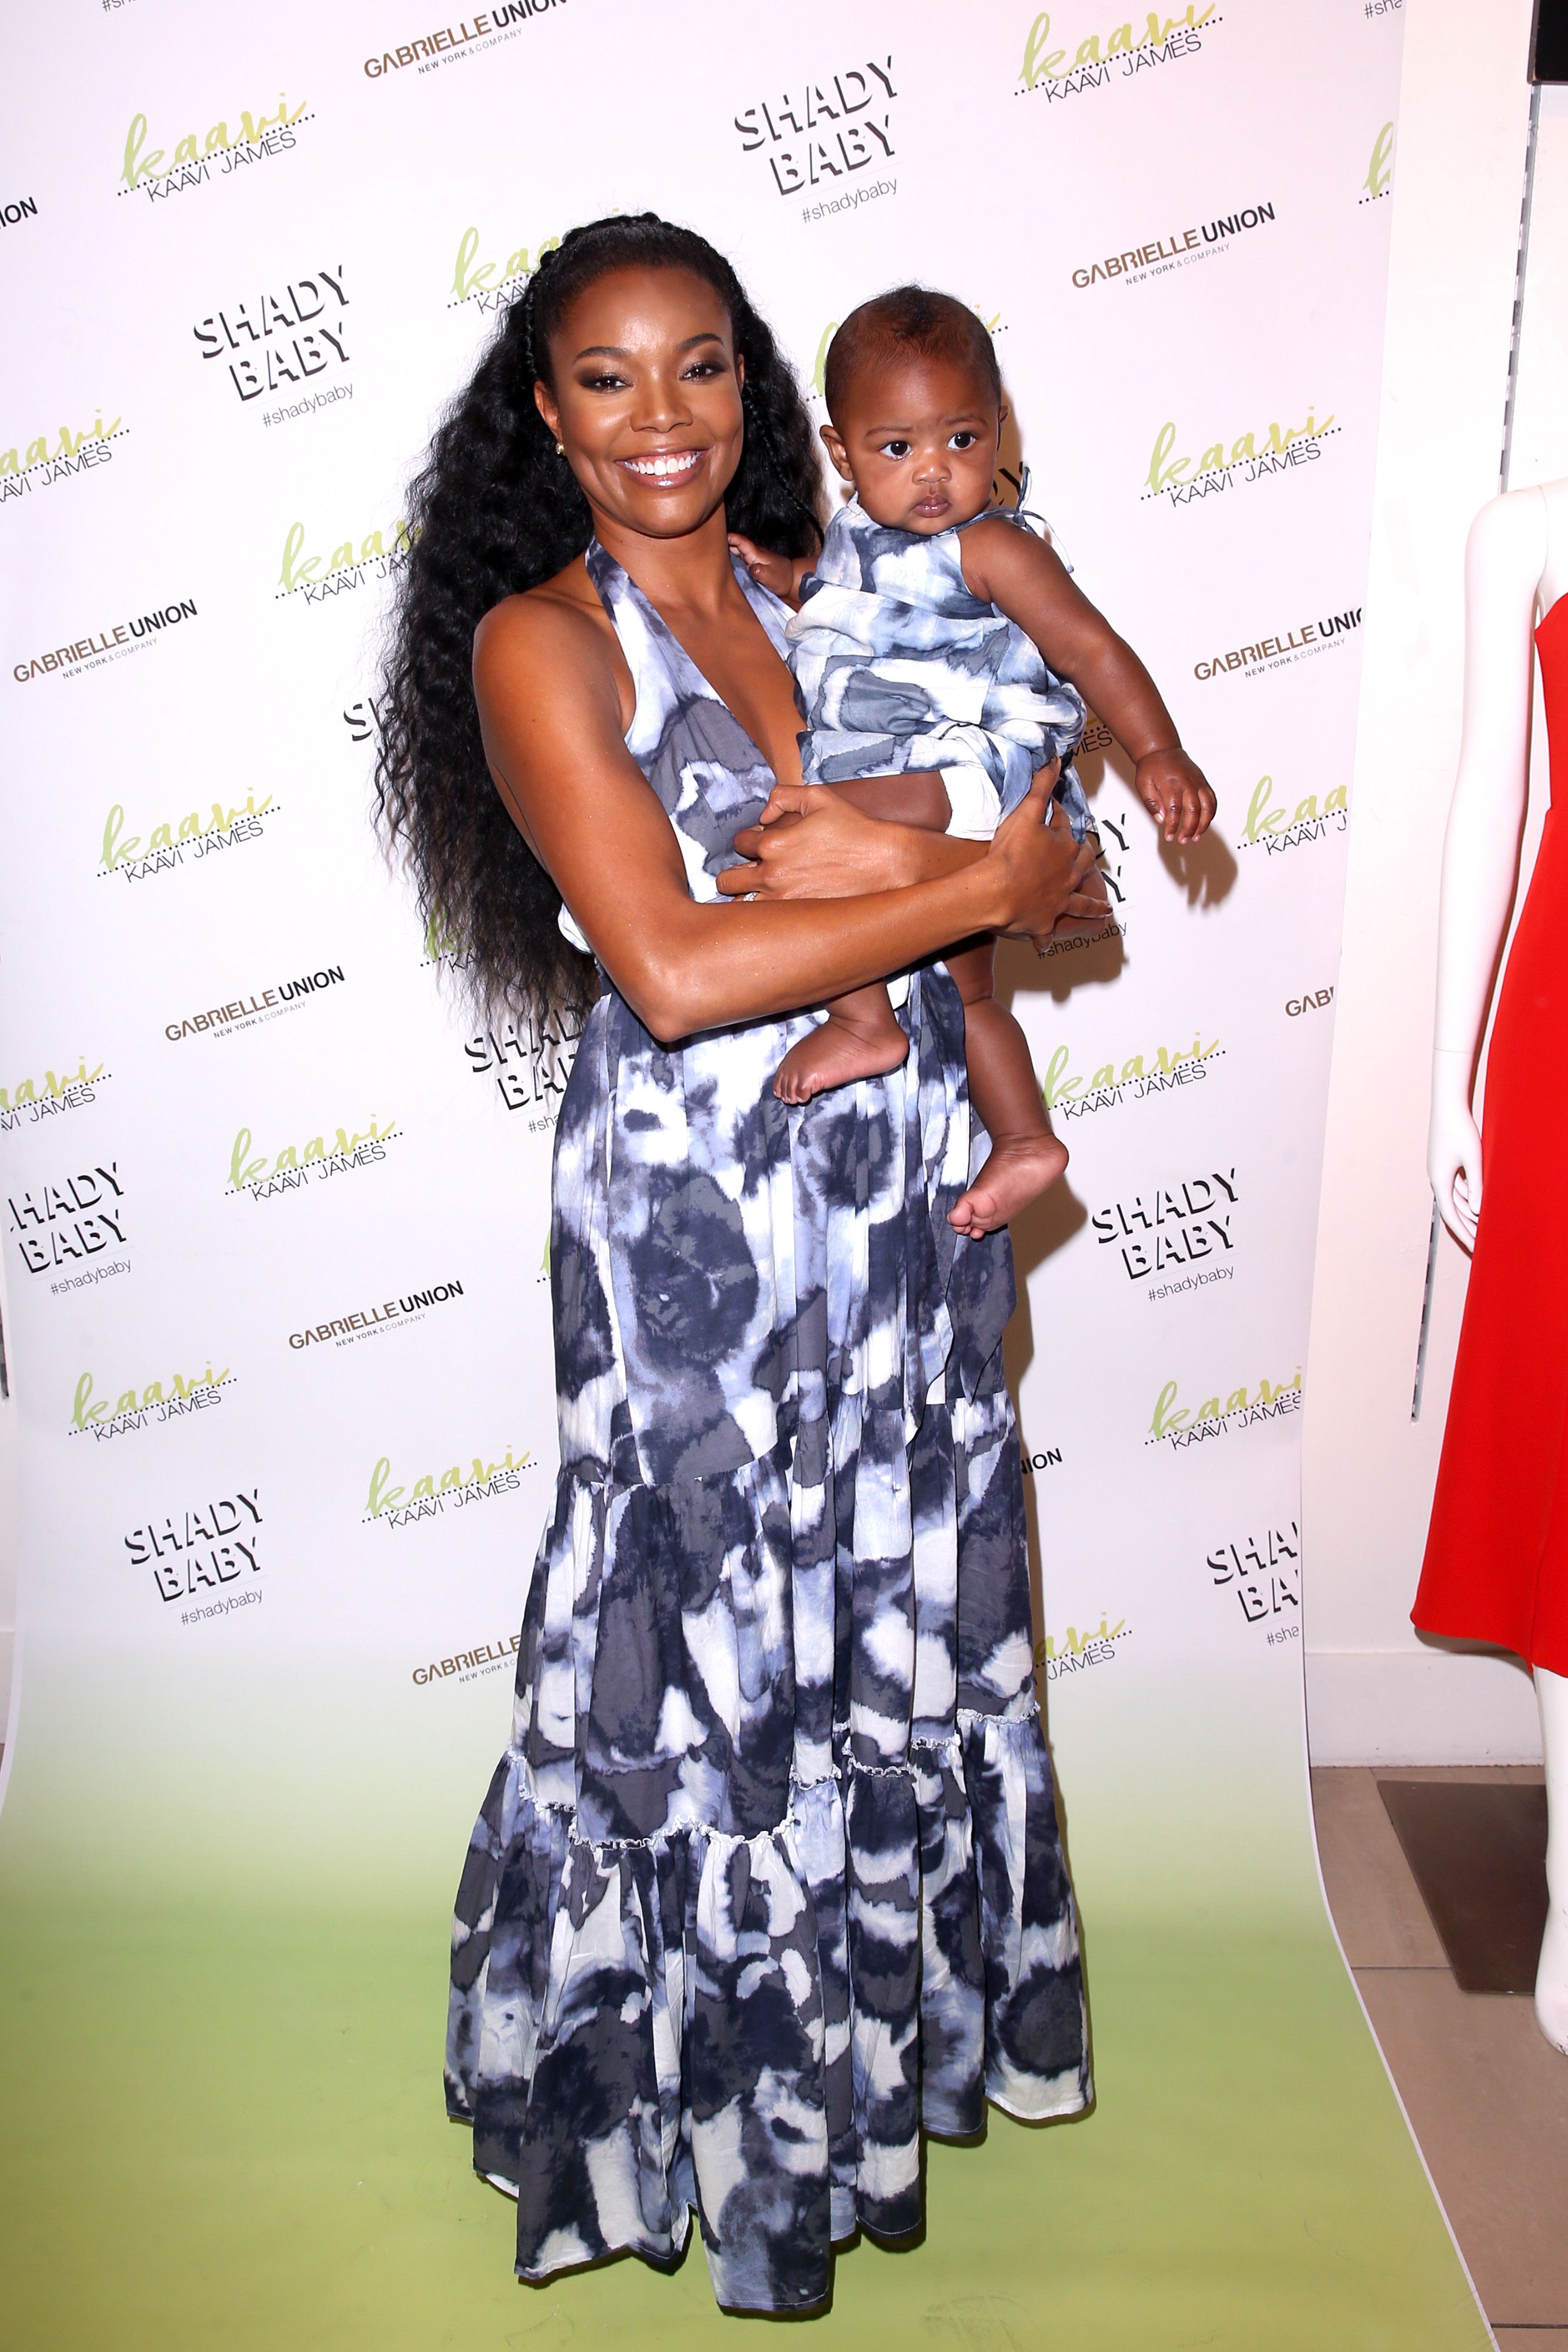 Gabrielle Union and Kaavia James Union Wade at New York & Company Store in Burbank, CA to launch the Kaavia James Collection on May 09, 2019 | Photo: Getty Images